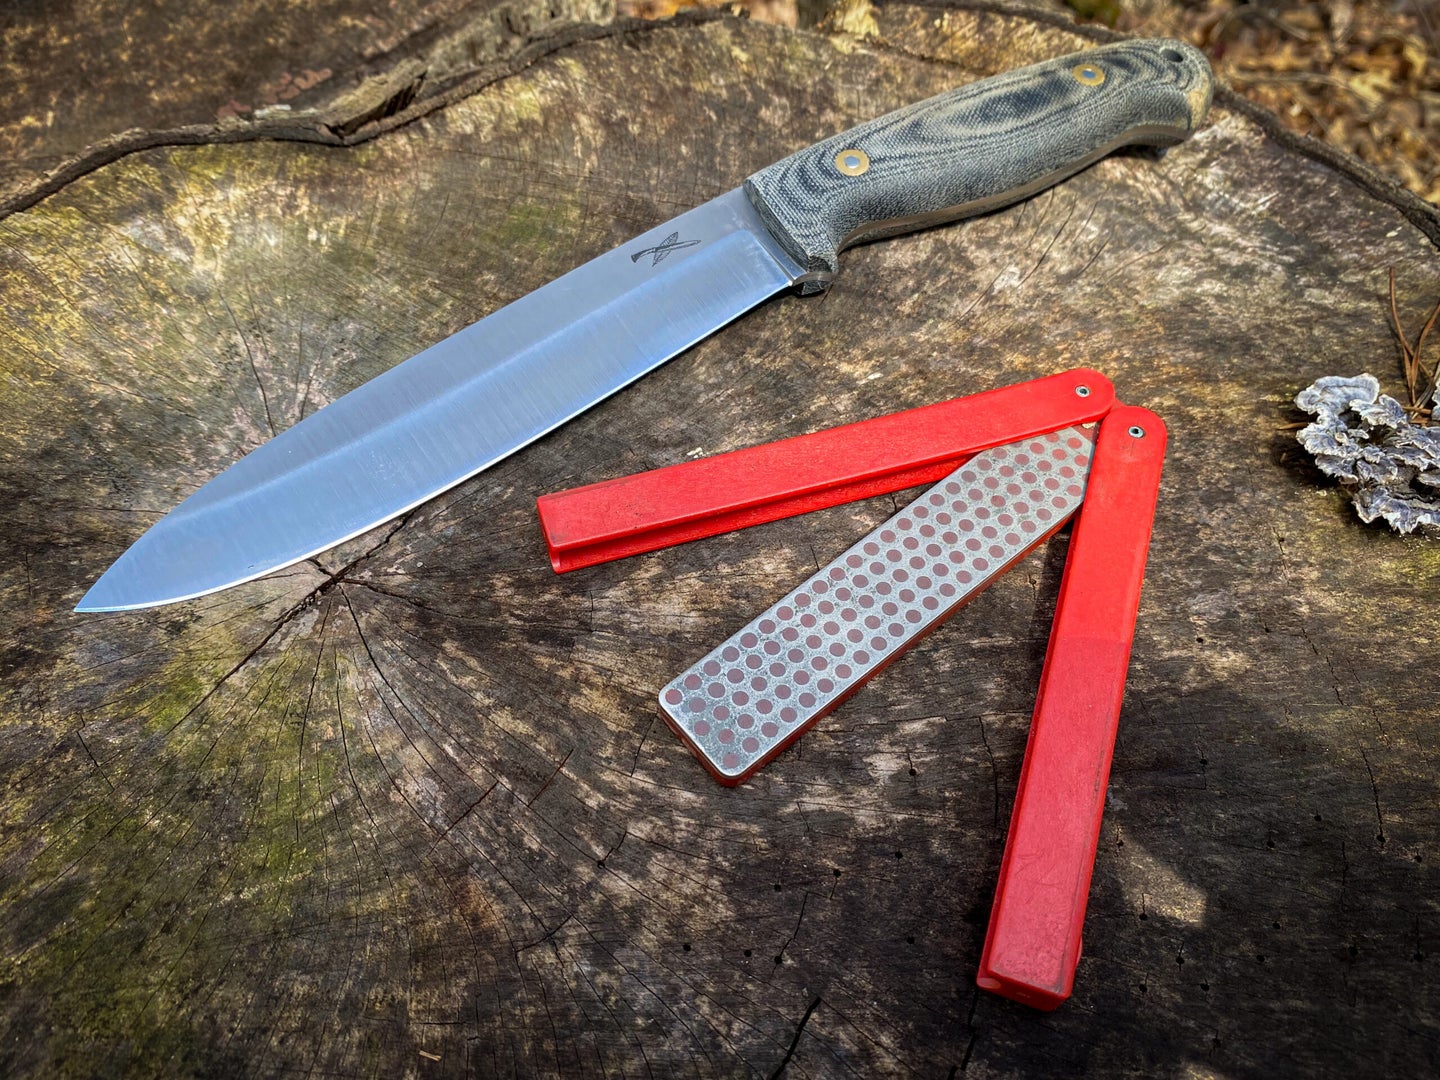 https://www.fieldandstream.com/uploads/2022/03/21/How-to-Sharpen-a-Knife-8-A-diamond-stone-has-an-integrated-cover-to-keep-in-your-pack-or-pocket-scaled.jpg?auto=webp&width=1440&height=1080